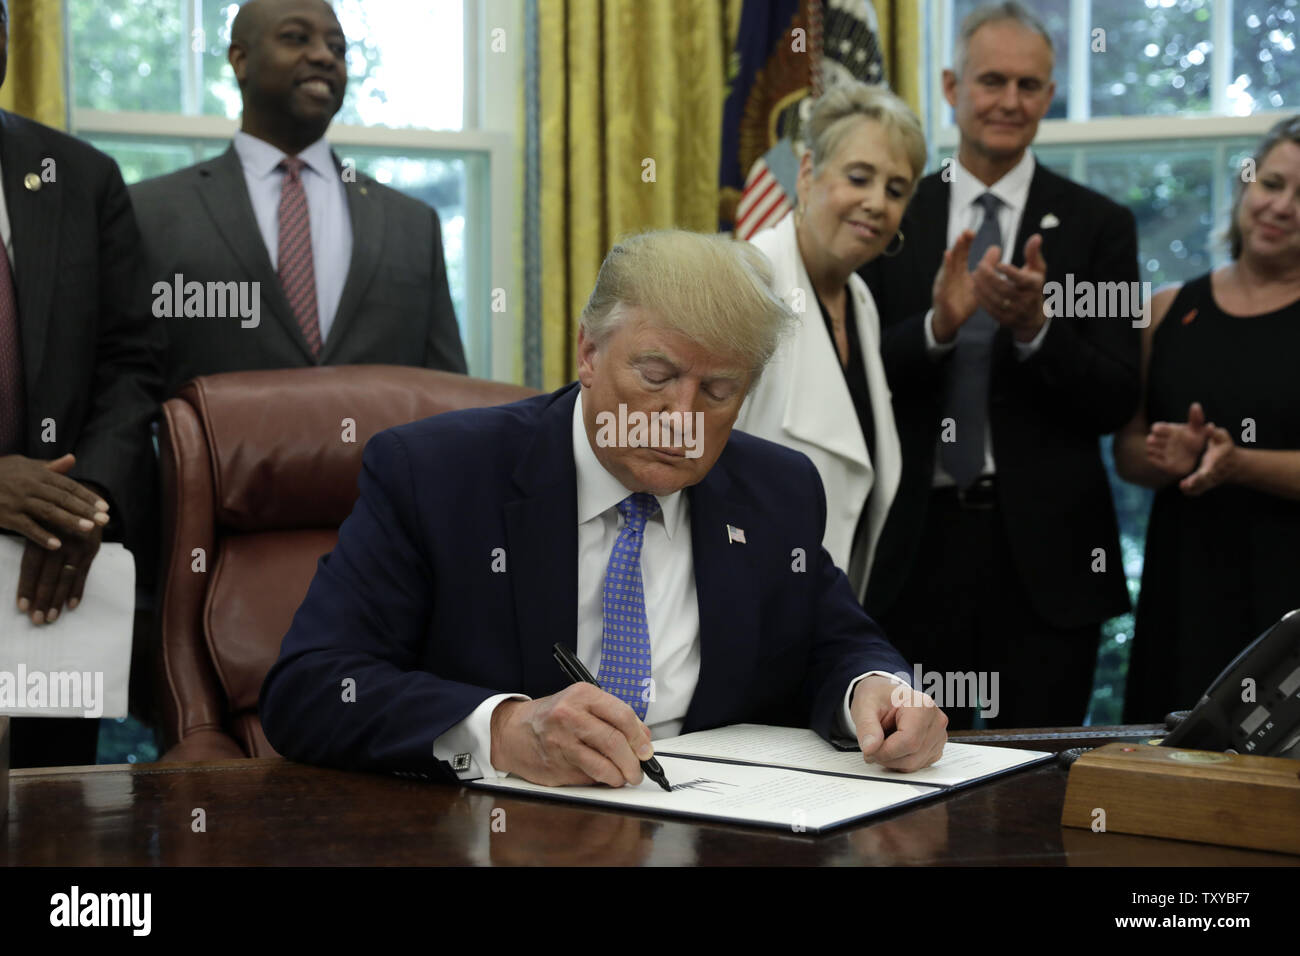 Washington, District of Columbia, USA. 25th June, 2019. US President Donald Trump signs an Executive Order Establishing a White House Council on Eliminating Regulatory Barriers to Affordable Housing in the Oval Office at the White House in Washington, DC, on June 25, 2019. Credit: Yuri Gripas/Pool via CNP Credit: Yuri Gripas/CNP/ZUMA Wire/Alamy Live News Stock Photo